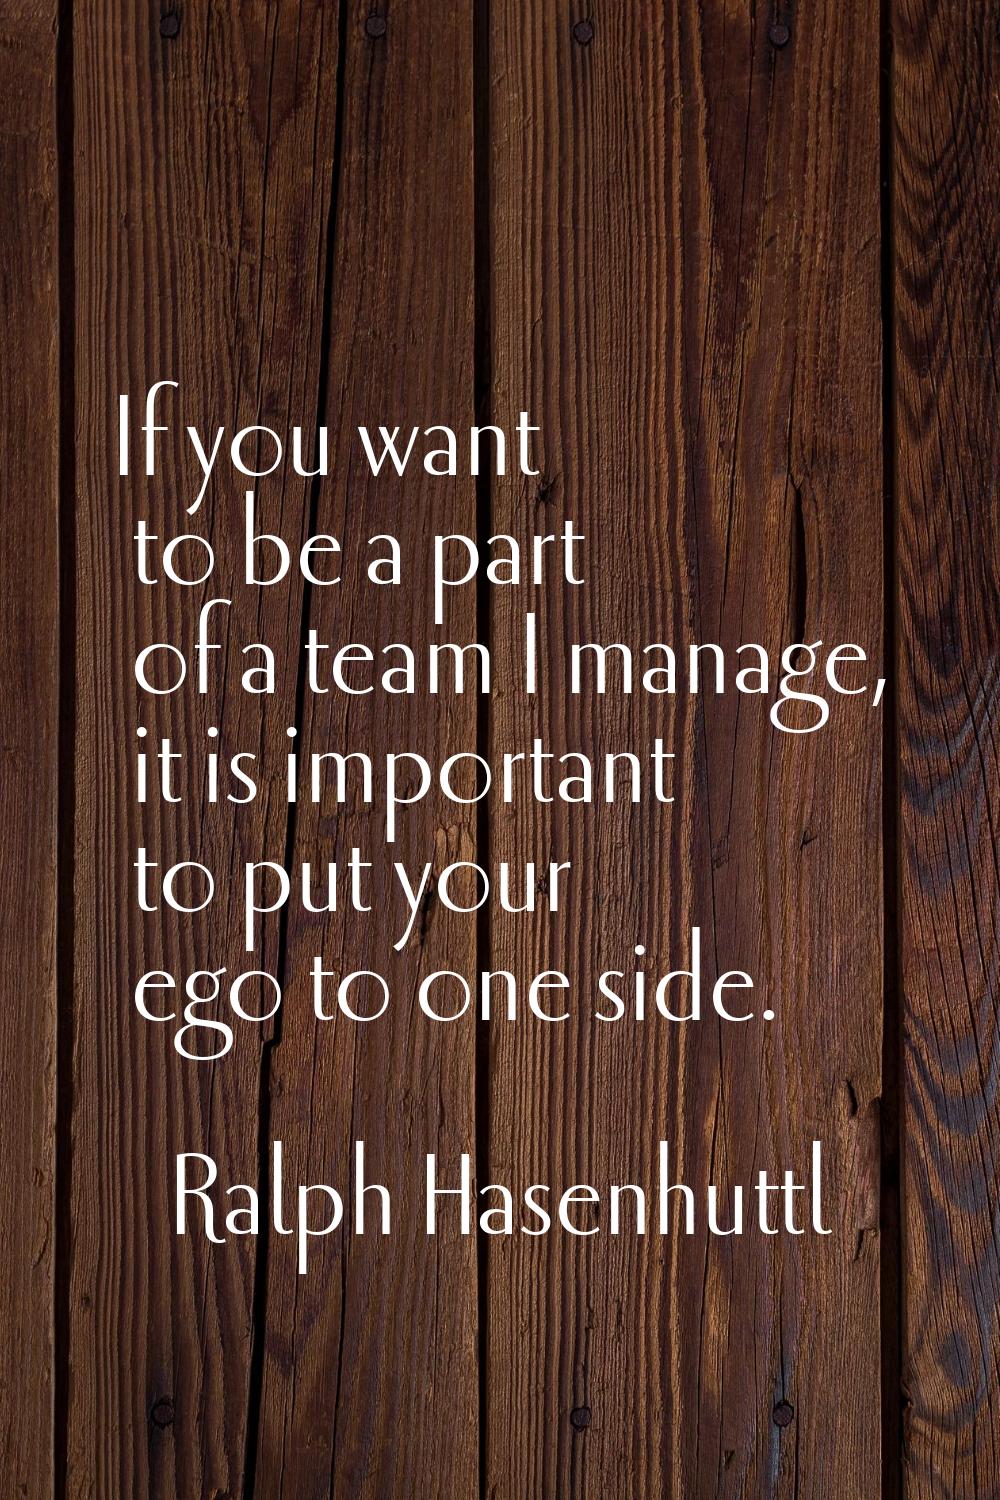 If you want to be a part of a team I manage, it is important to put your ego to one side.